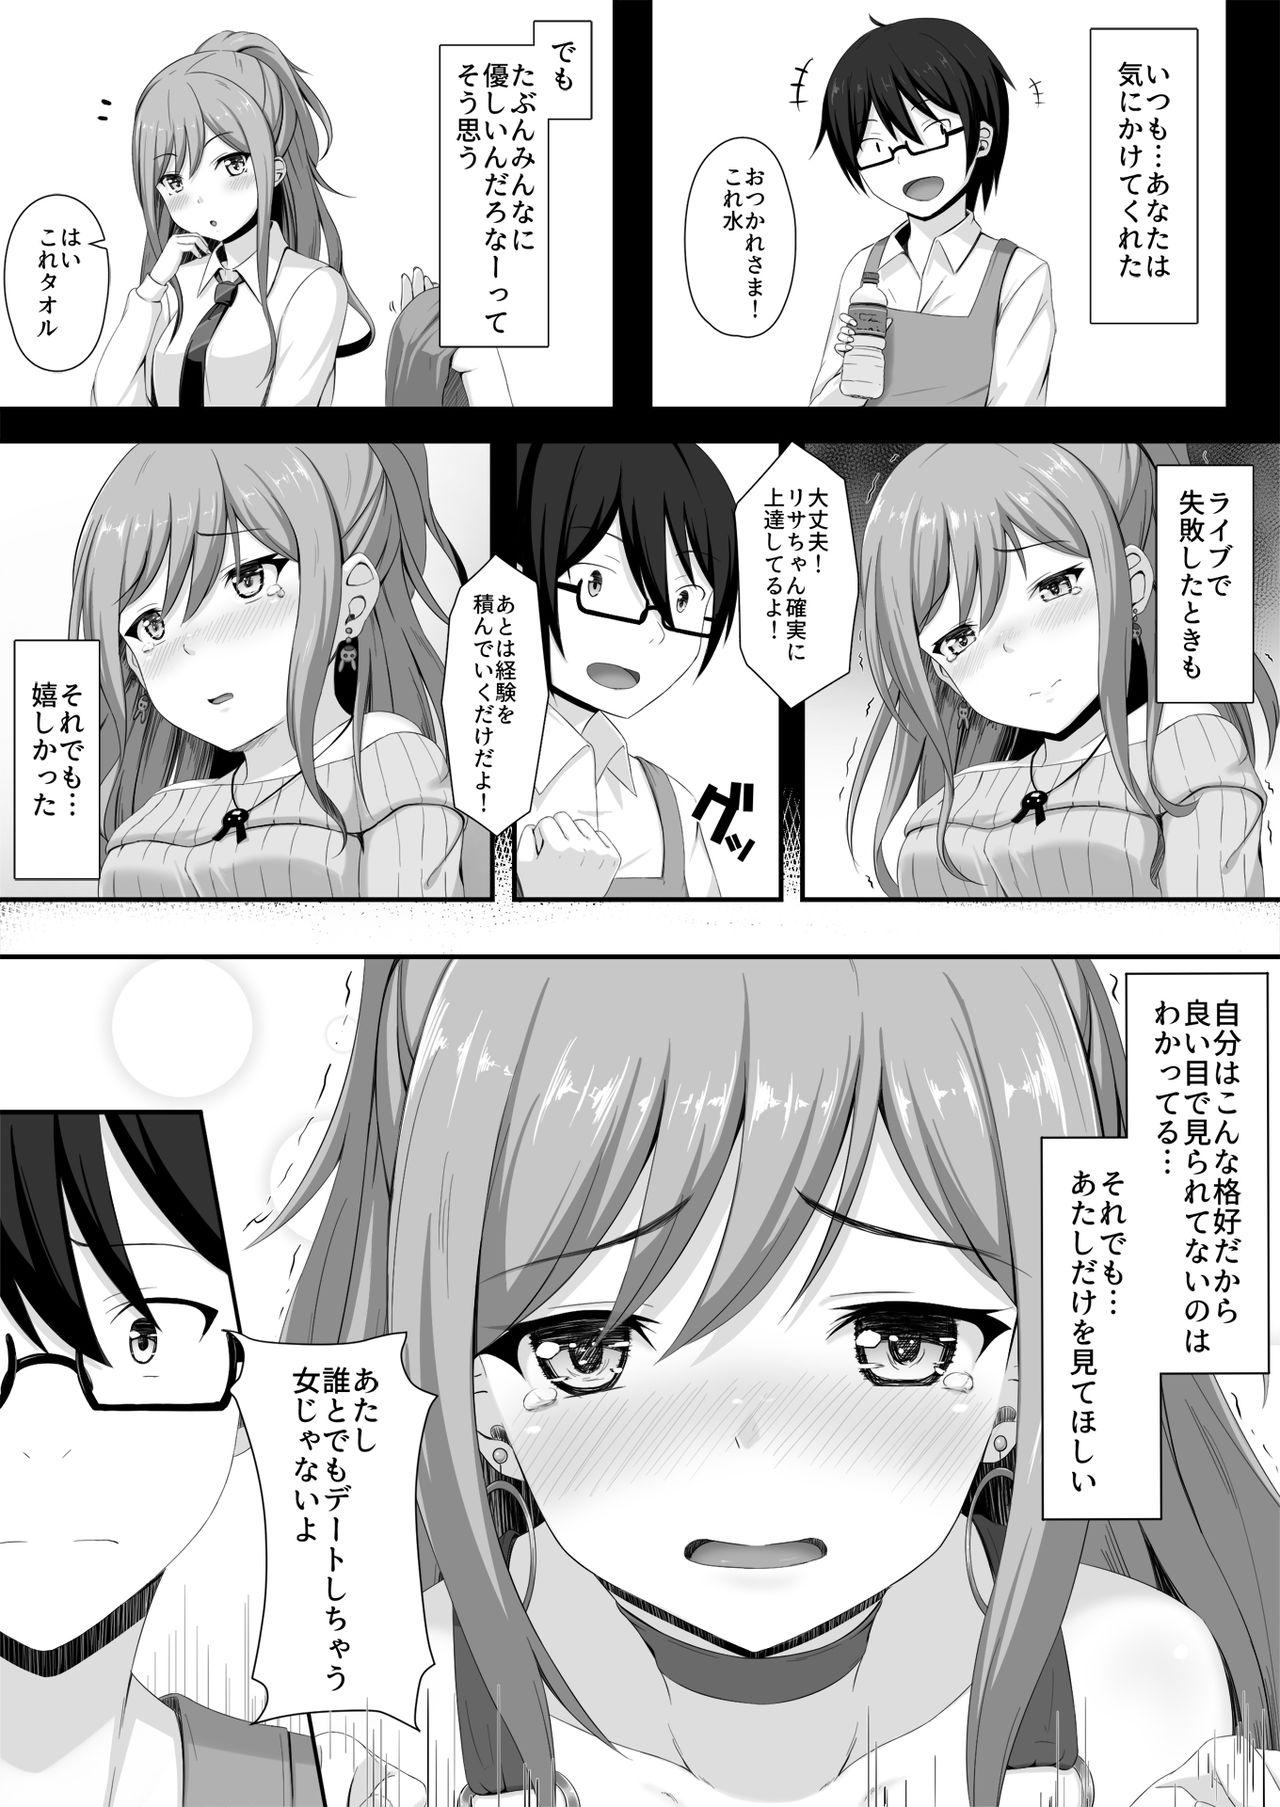 Domination Route Episode In Lisa Ne - Bang dream Hidden - Page 8